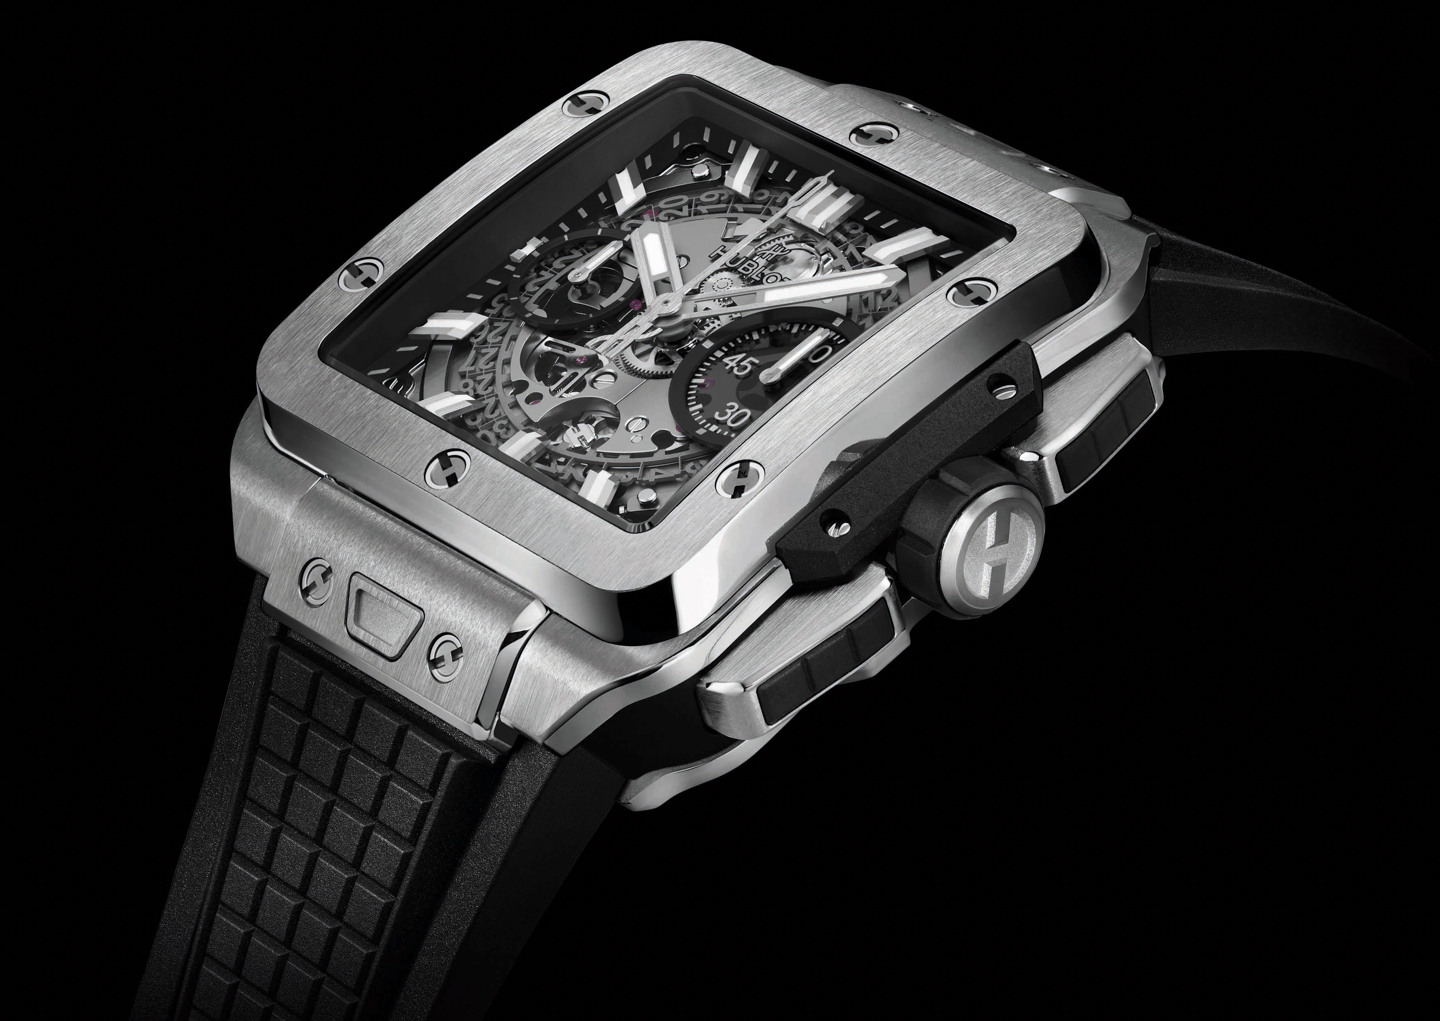 Hublot Makes It Hip To Be Square In 2022 - Watches of Switzerland